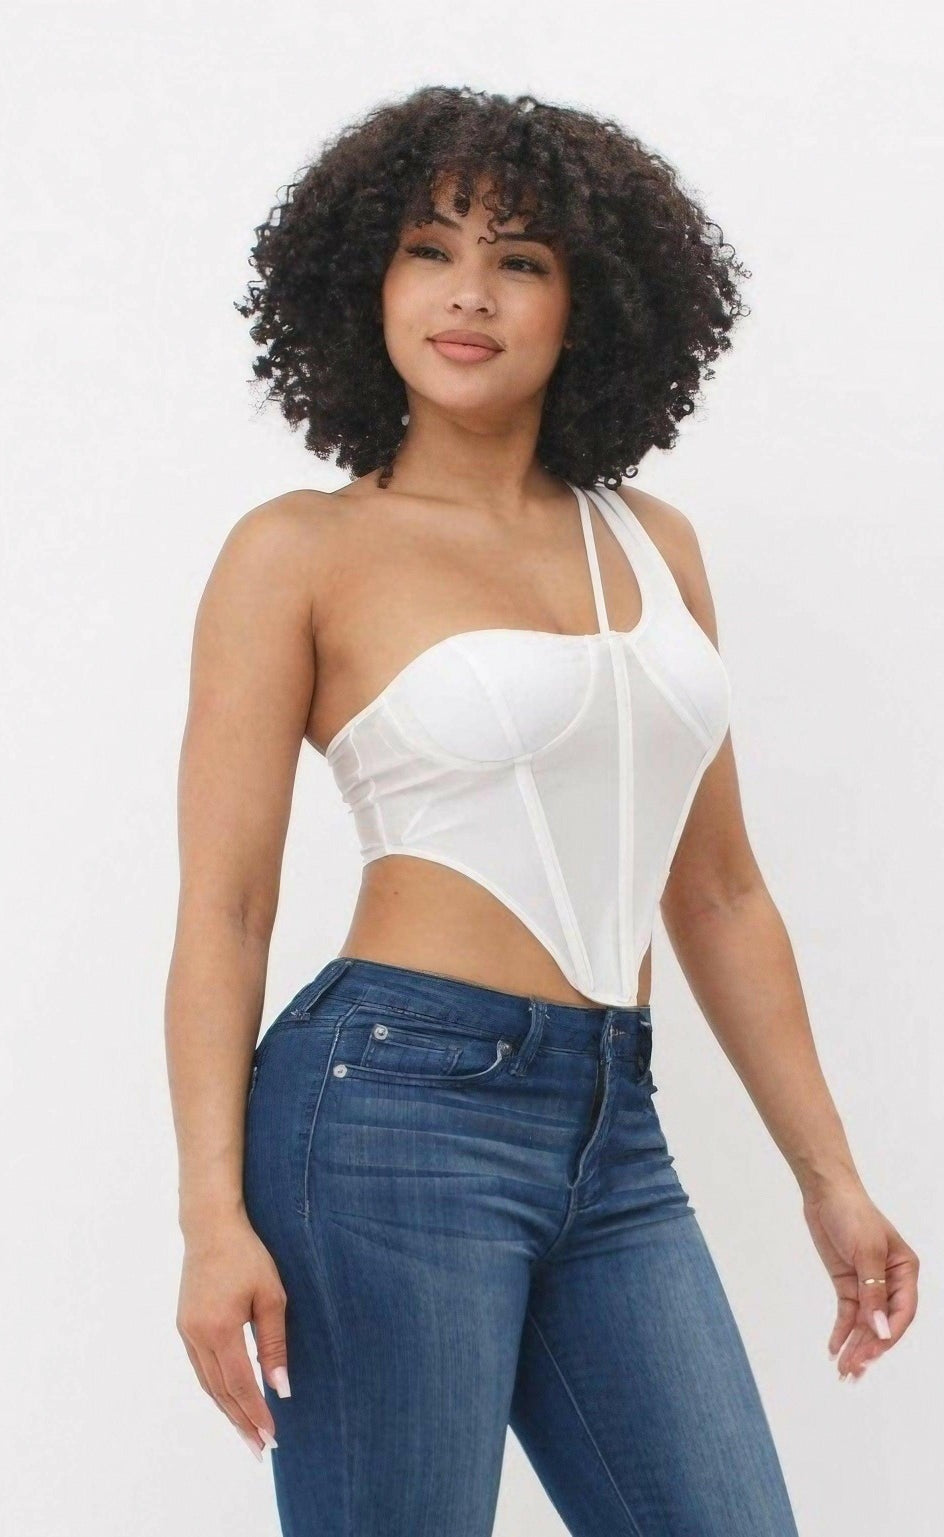 Epicplacess tops S / WHITE Bodice Corset Style One Shoulder Tops A6453